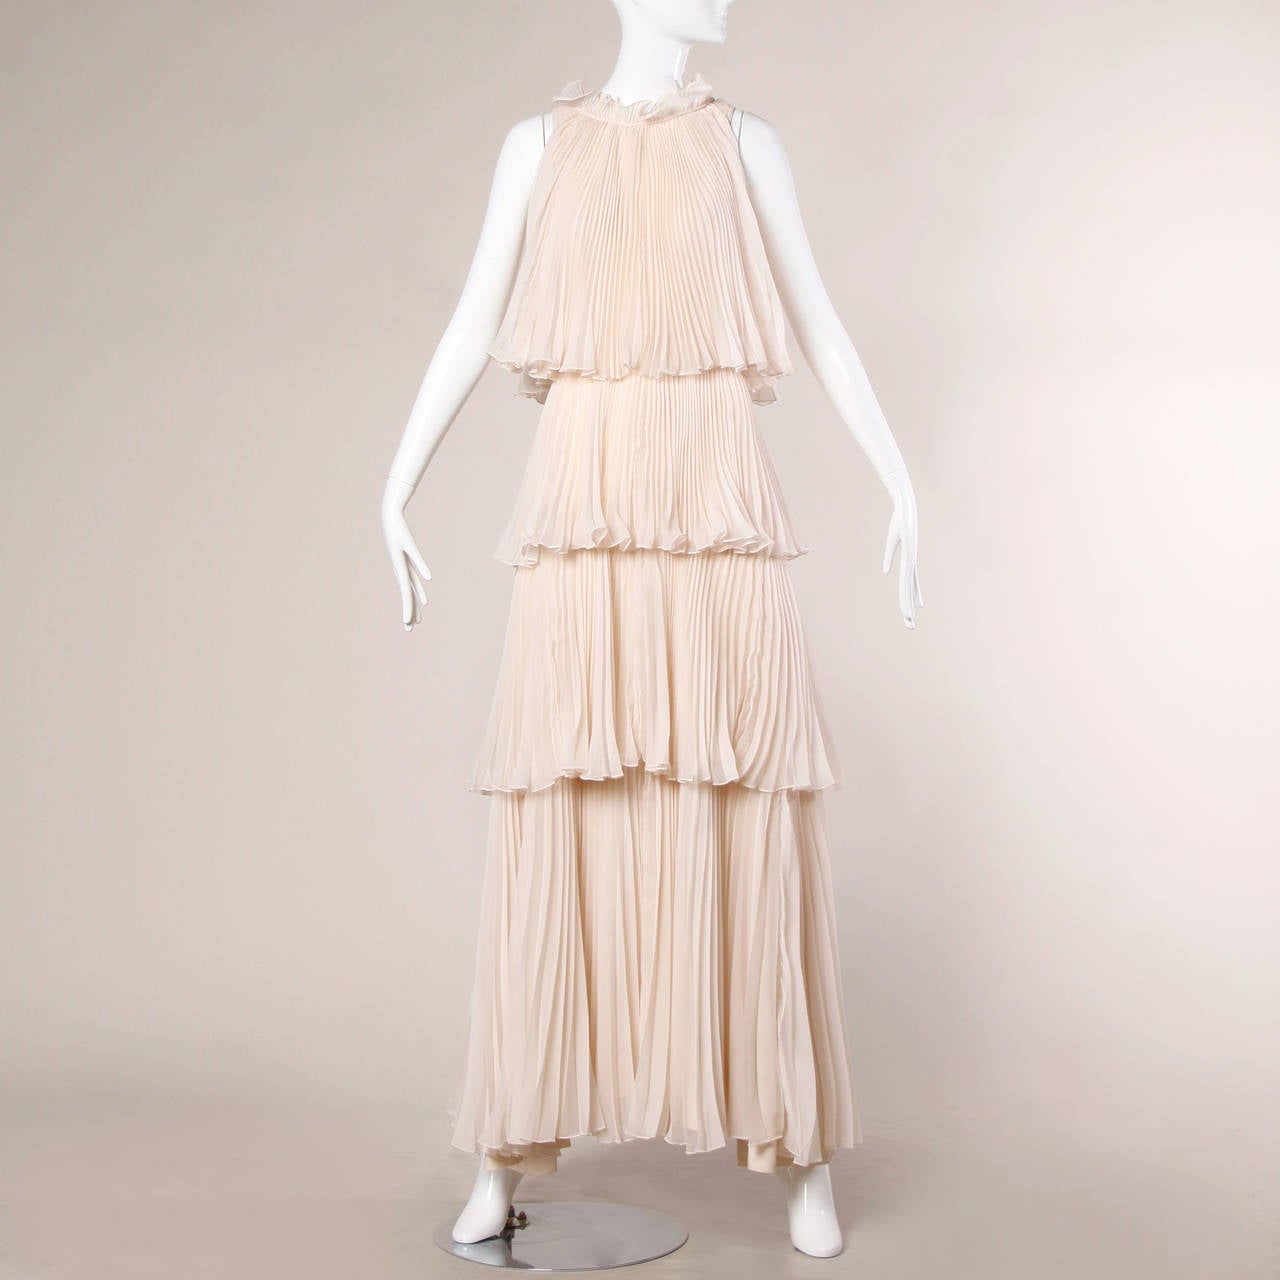 Incredible blush tiered accordion pleated maxi dress by English designer Jean Varon. This dress has a huge sweep and features a lot of beautiful fabric! Sleeveless sleeves and ruffled neckline.

Details:

Unlined
Back Zip Hook and Tie